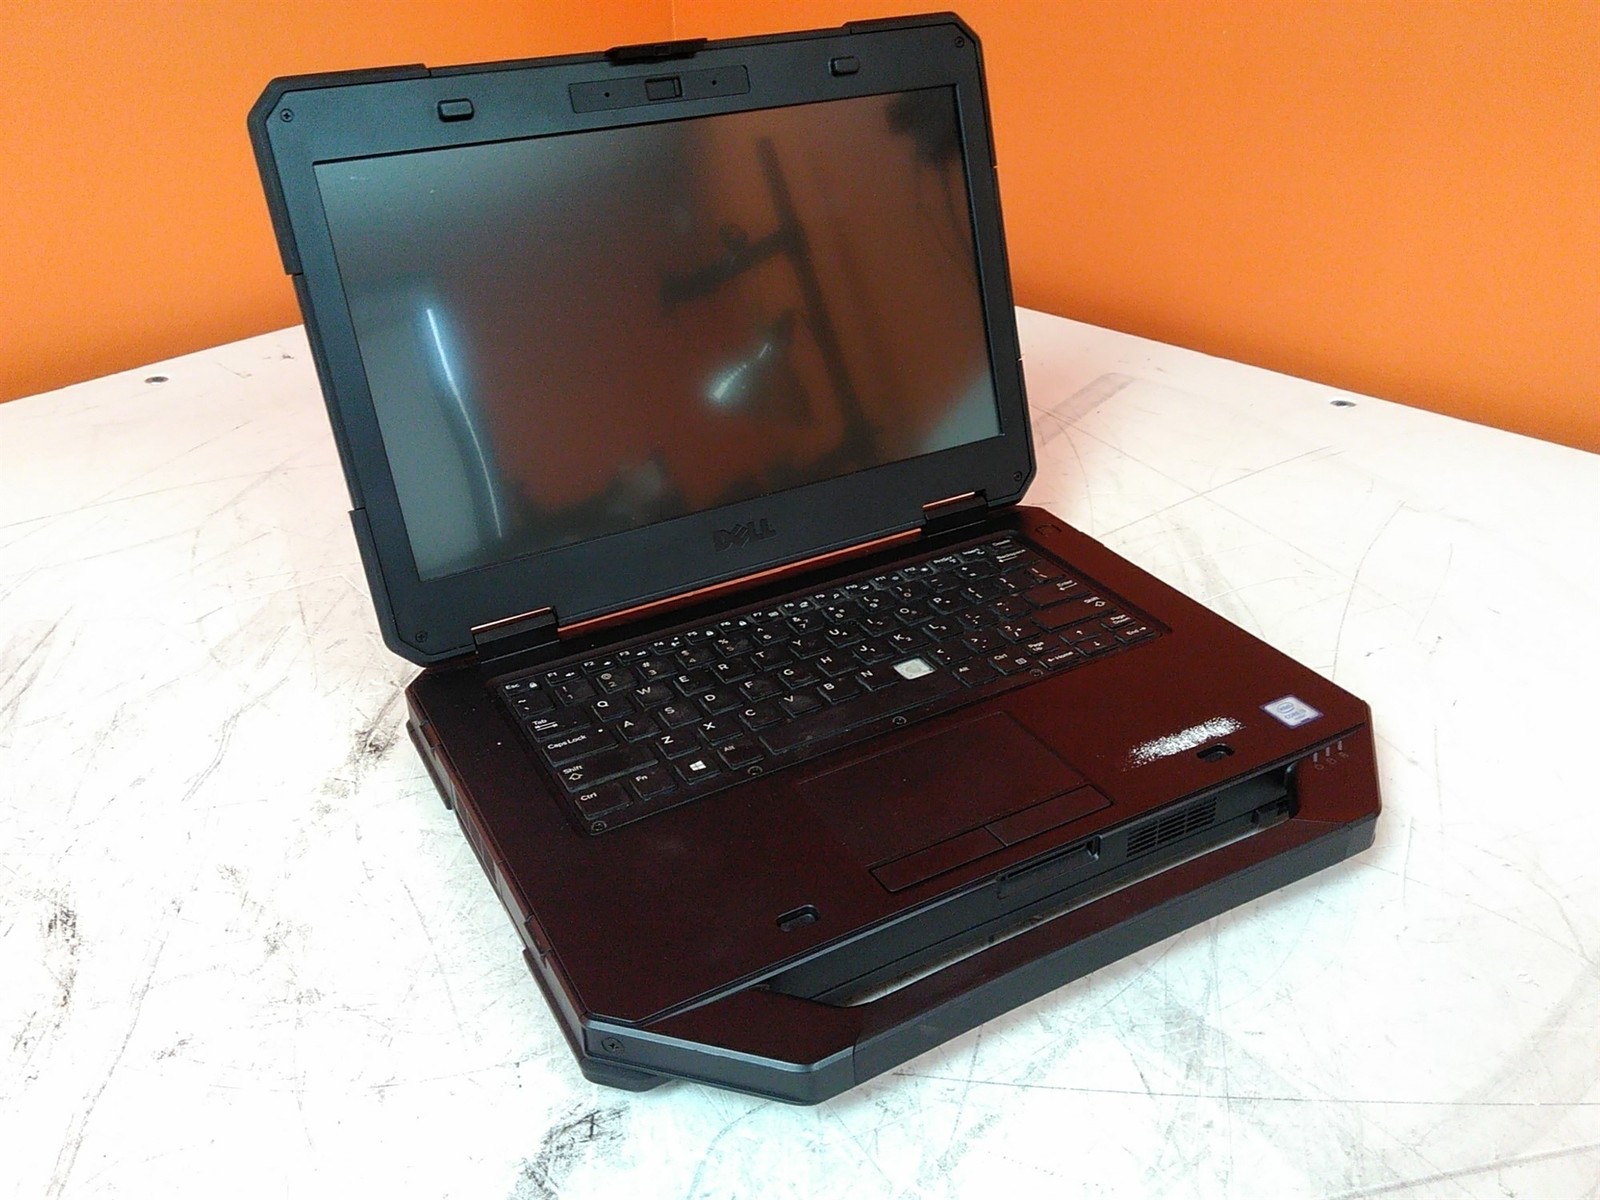 Primary image for Dell Latitude 14 Rugged 5414 Laptop i3-6100U 2.3GHz 4GB 0HD Cracked Case NO PSU